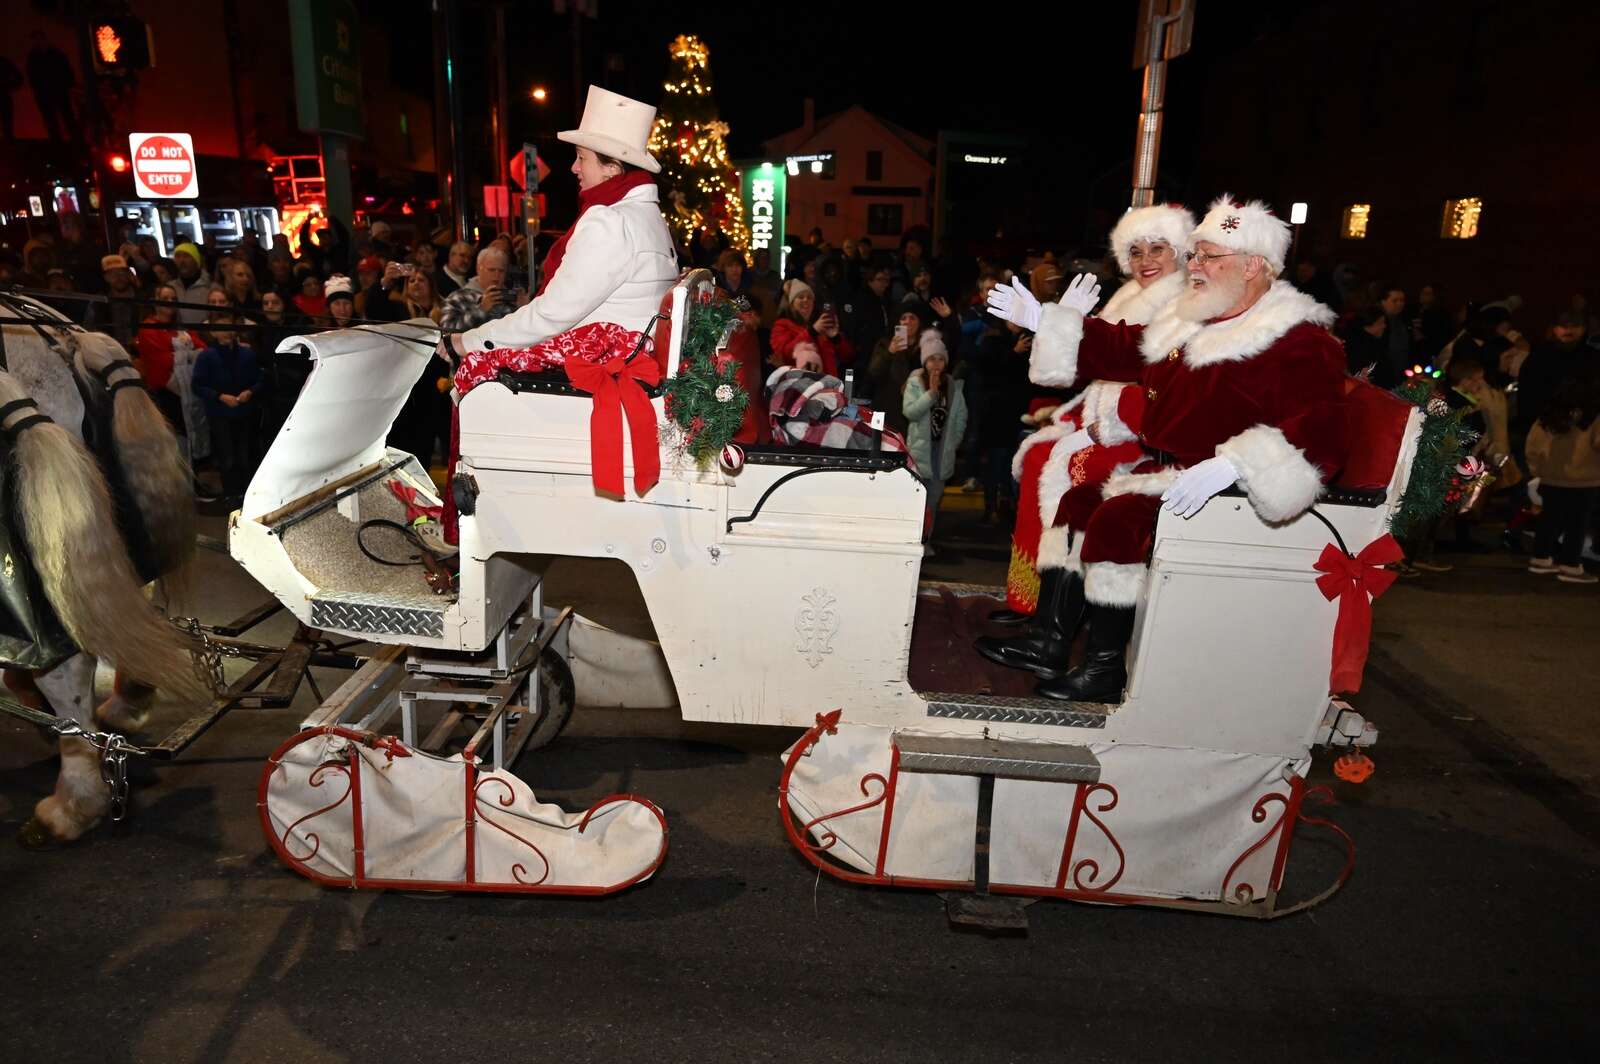 Santa and Mrs. Claus greet during the Miracle on Main